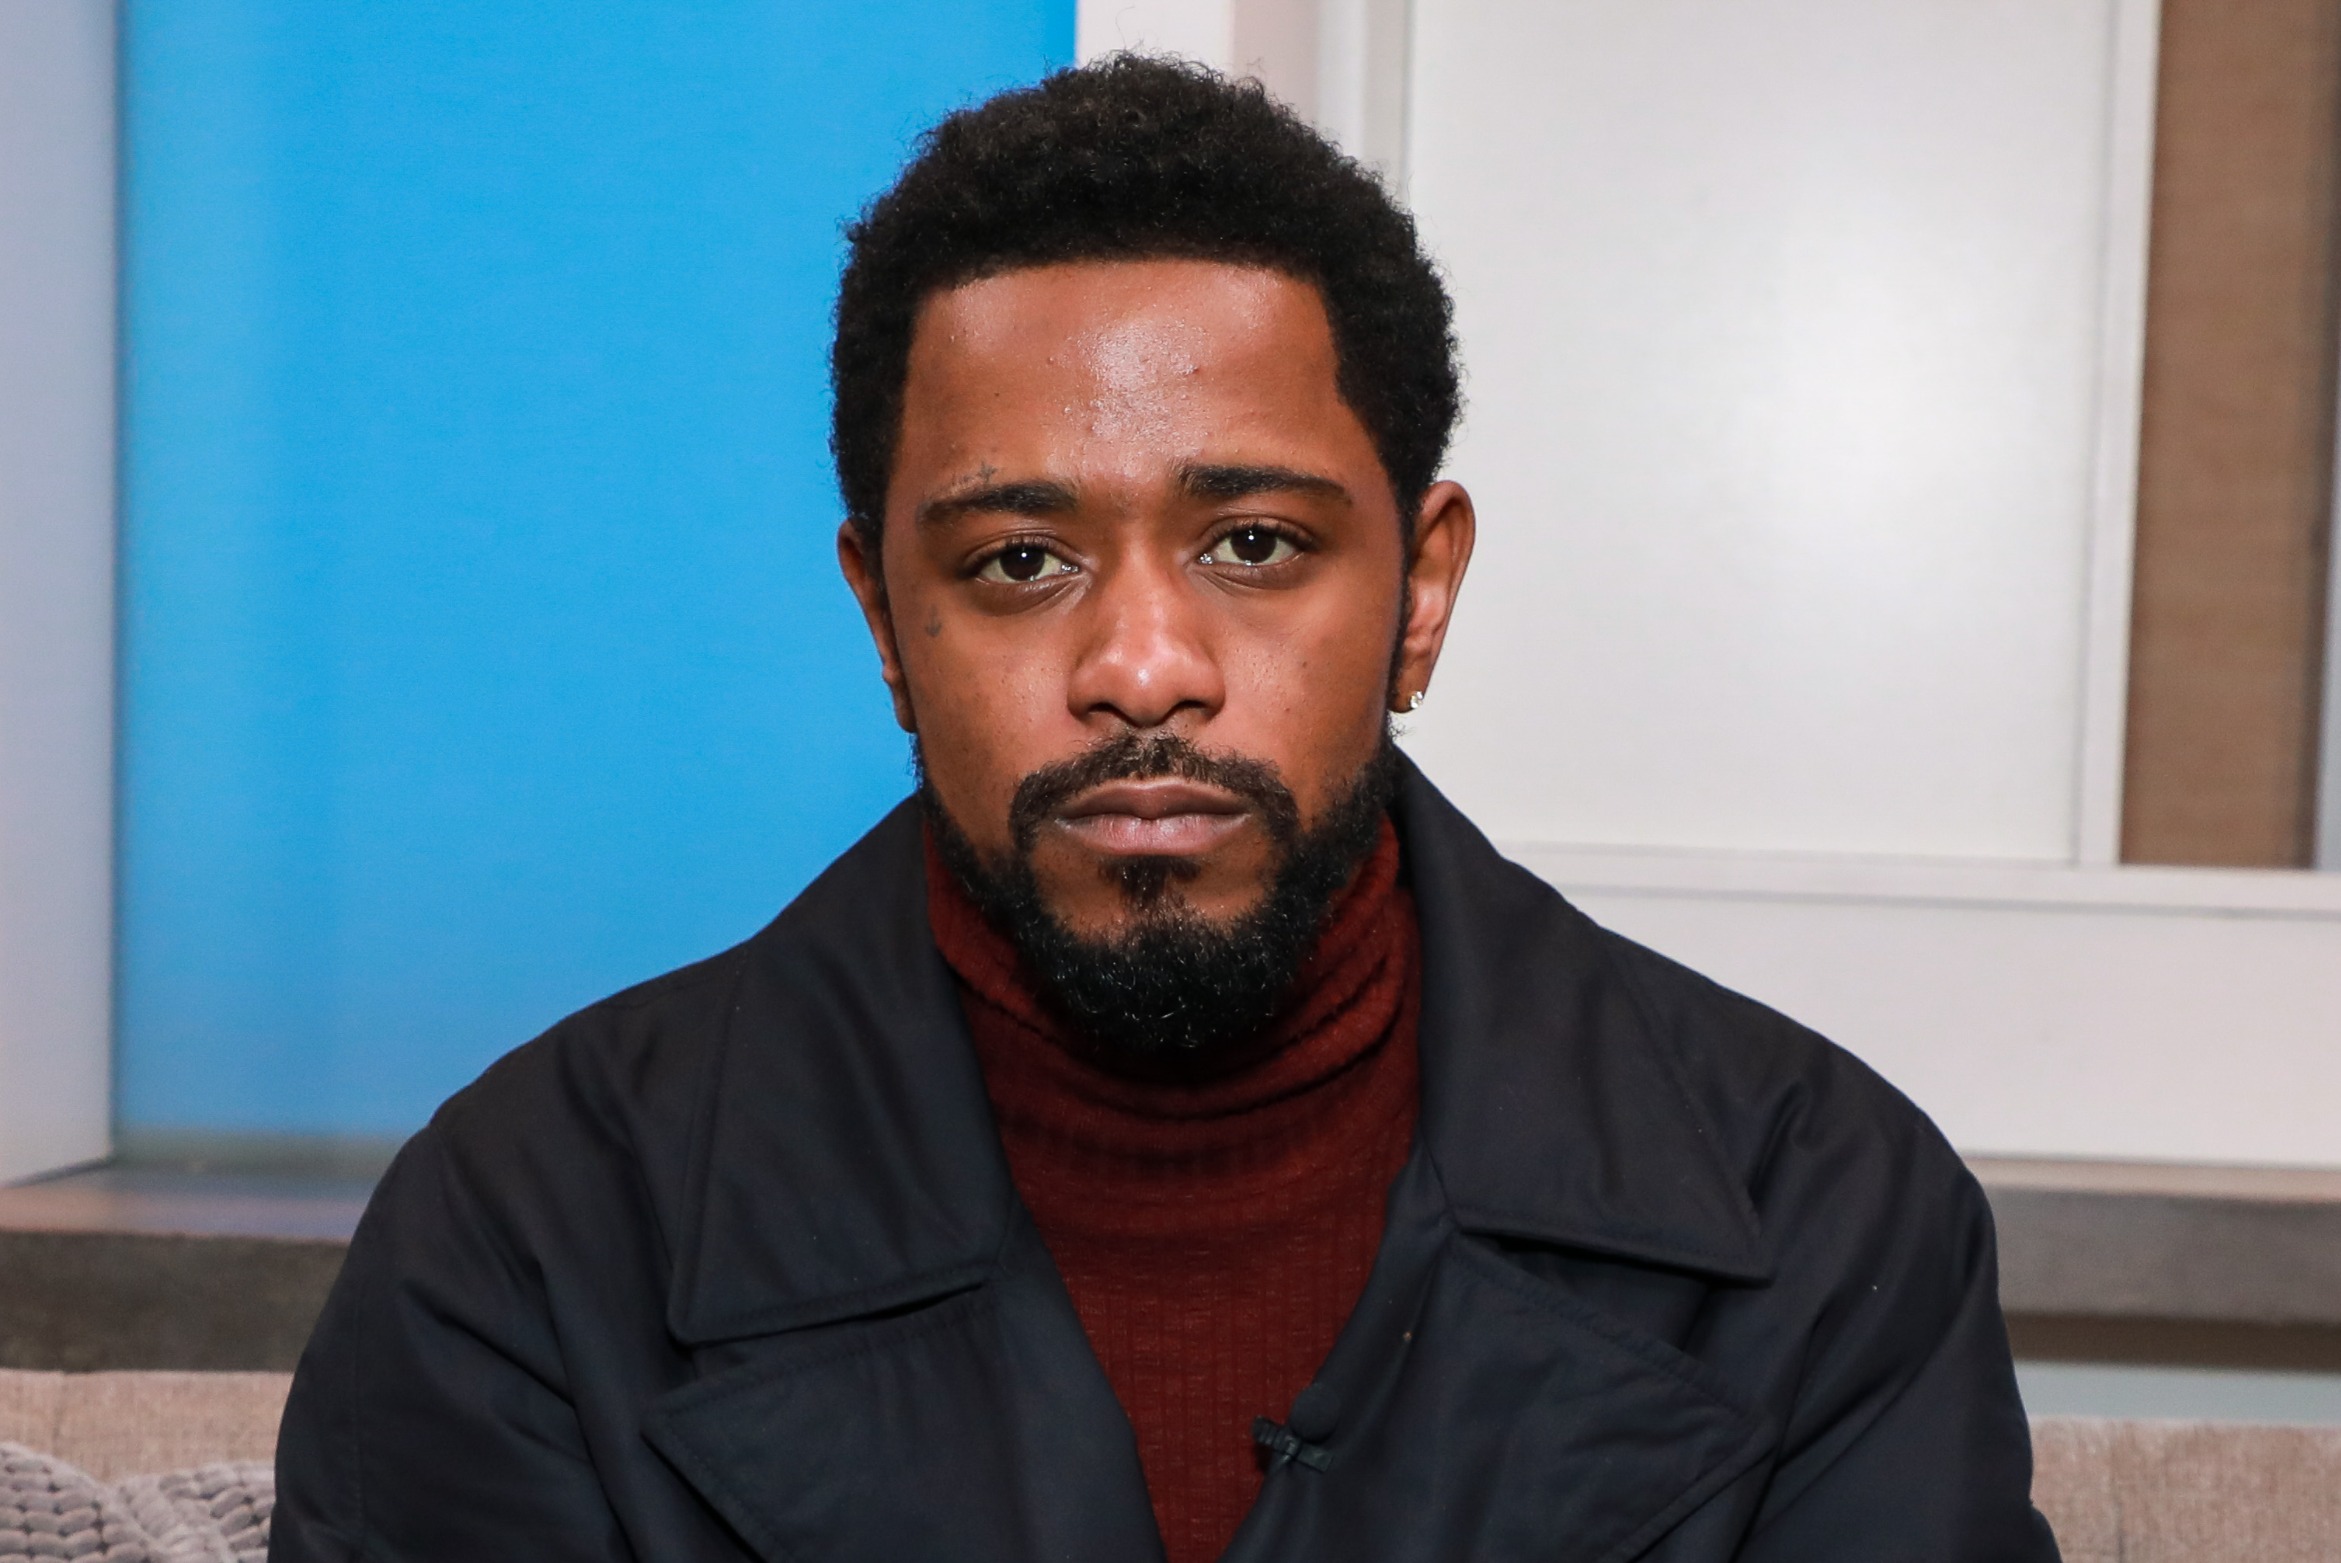 LaKeith Stanfield Posts, Then Deletes Apparent Anti-Vaccine Remarks on  Instagram